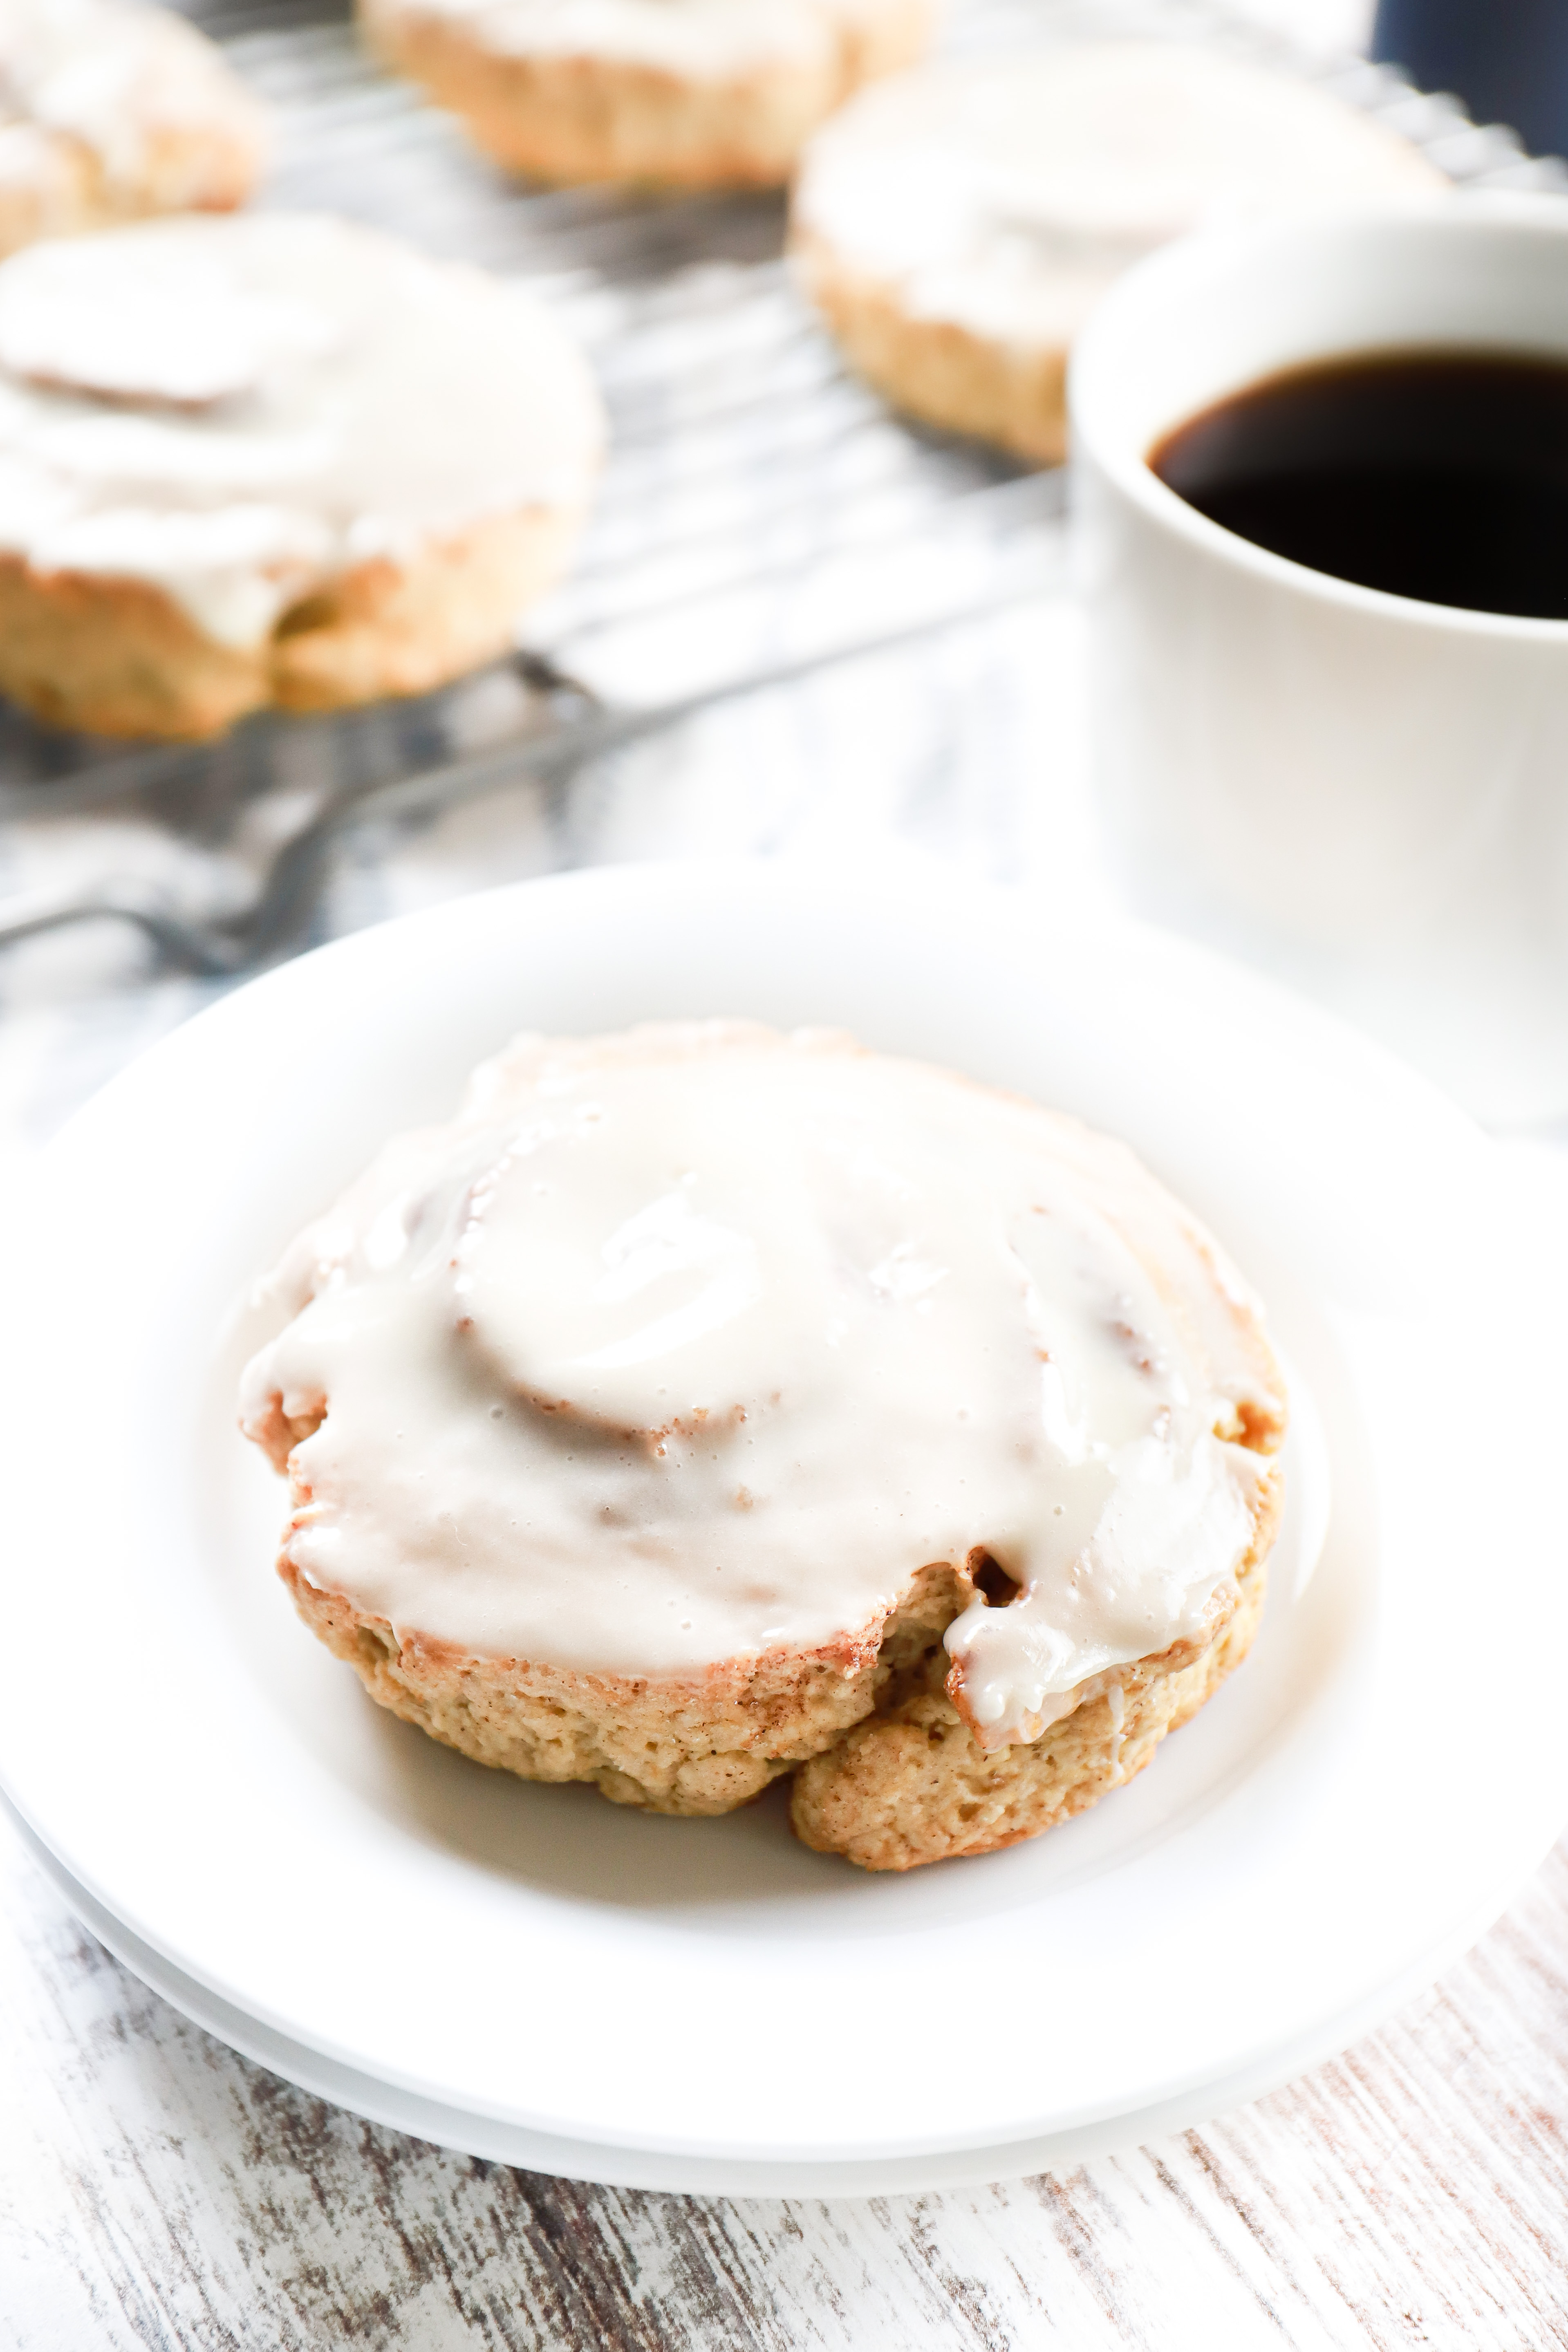 Cinnamon roll scone on a small white plate with more scones on a cooling rack in the background.